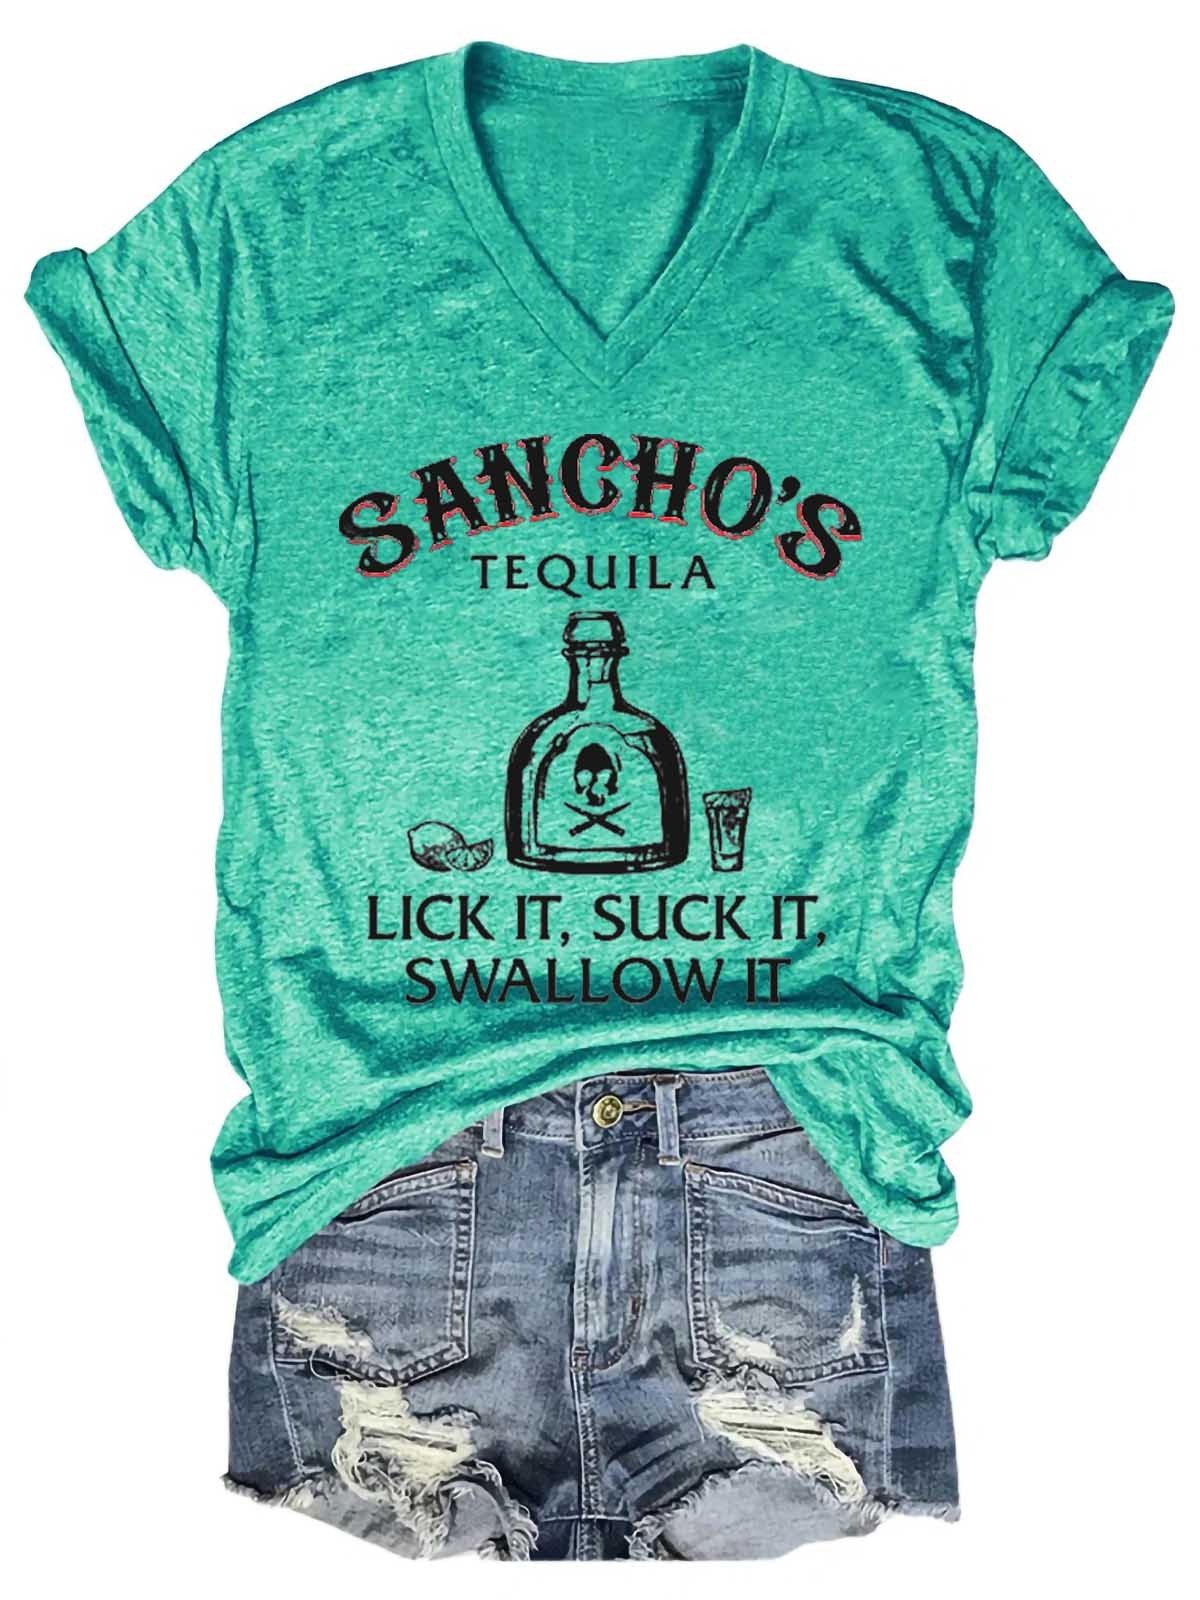 Women's Sancho's Tequila Lick It Suck It Swallow It V-Neck T-Shirt - Outlets Forever